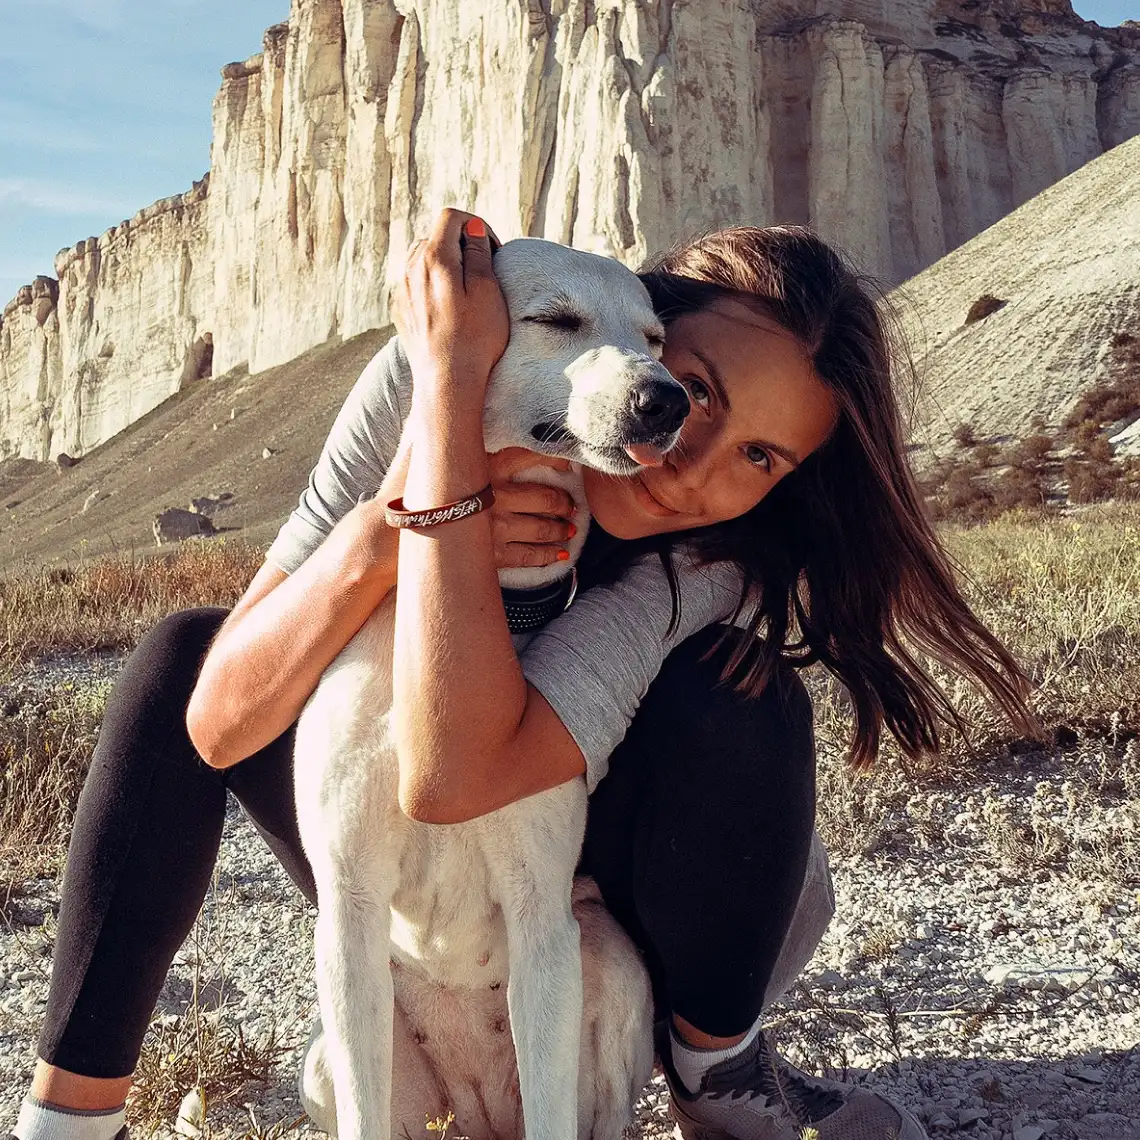 A hiker kneels behind a white Labrador mix hugging them in front of towering cliffs